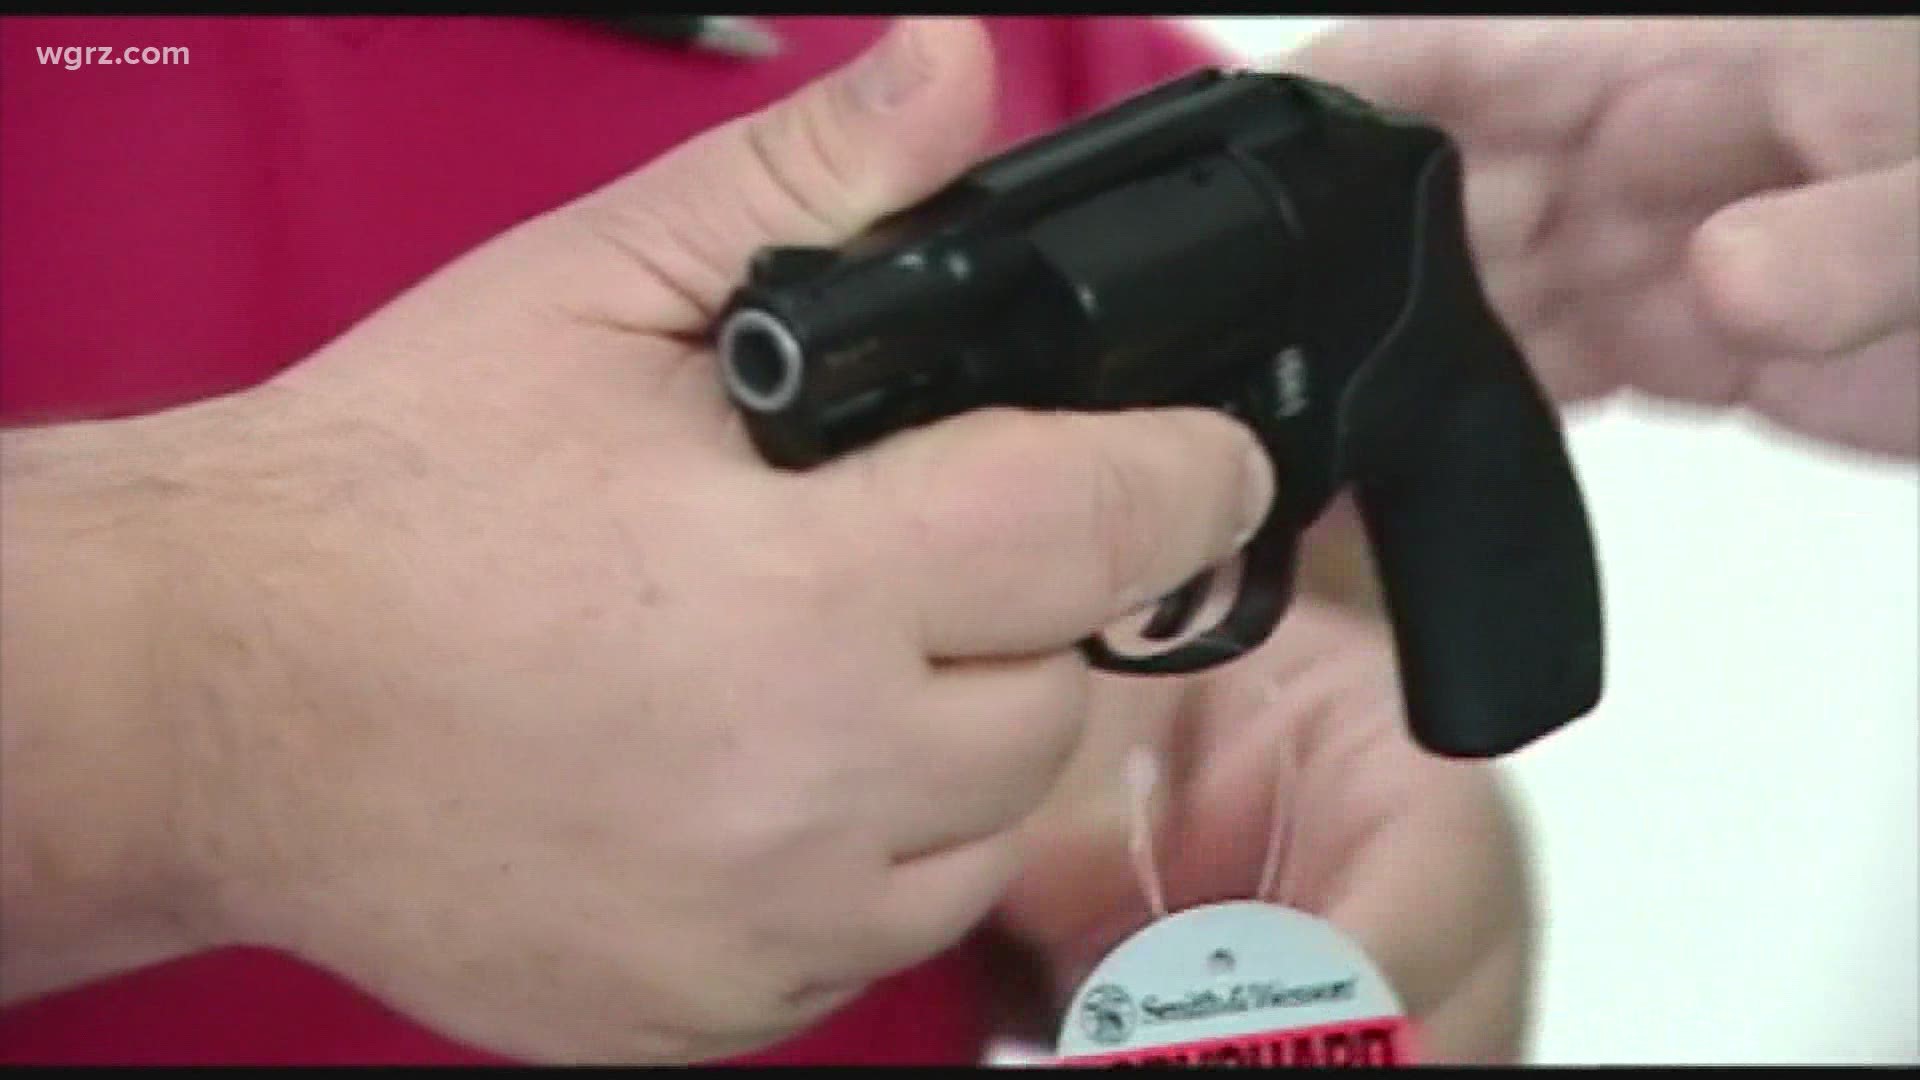 Legal gunowners need not be concerned as state officials say they are targeting illegal weapons.